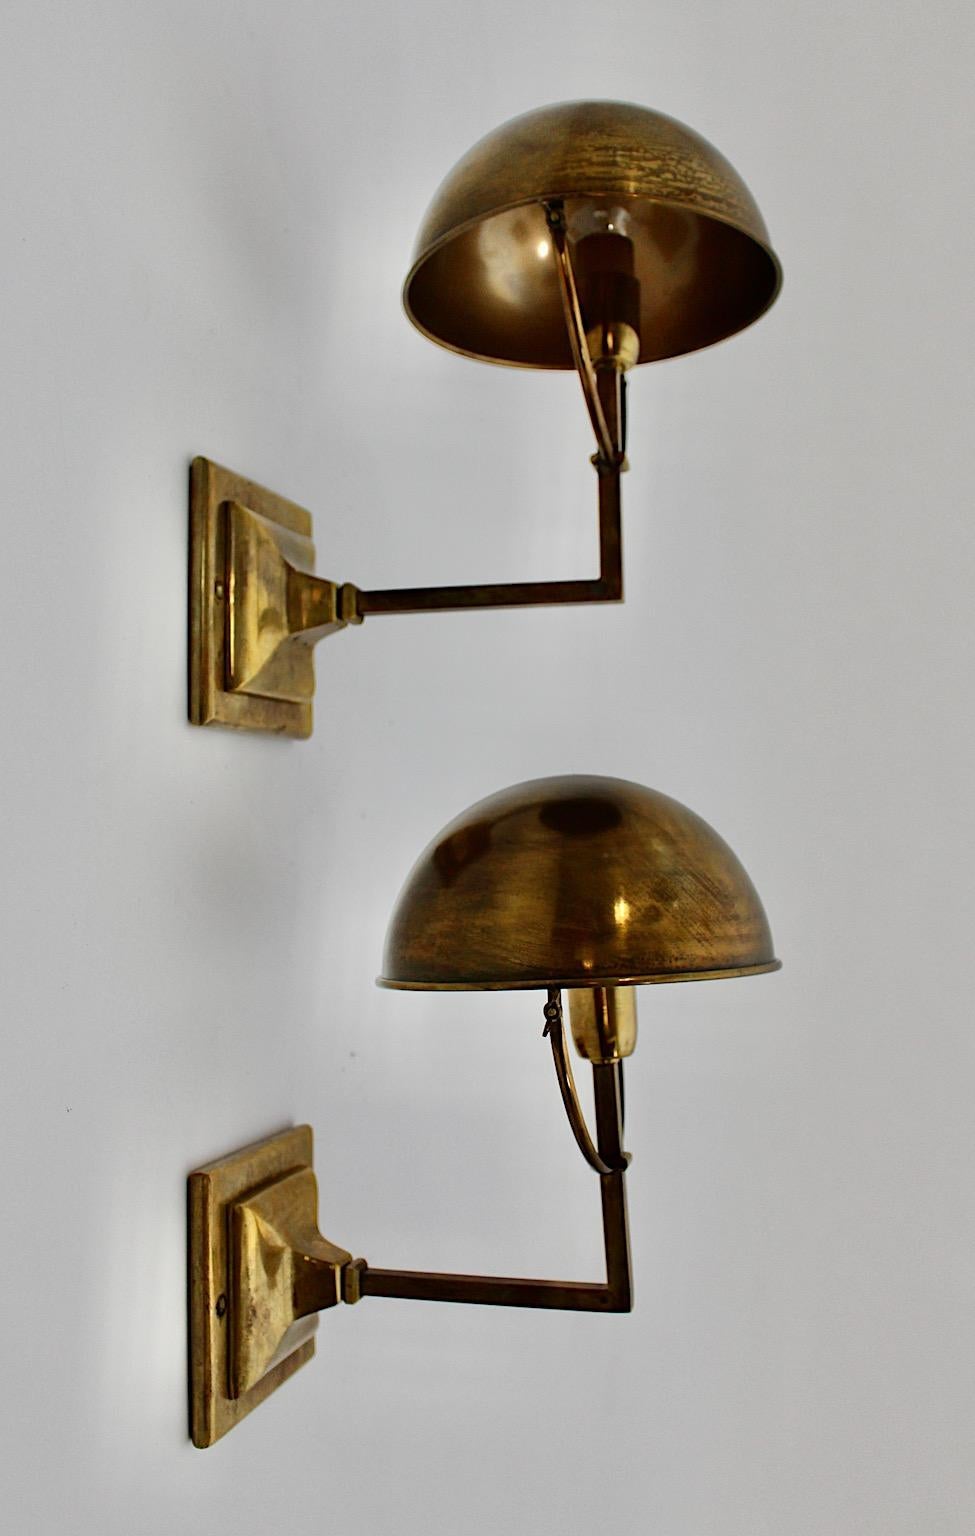 Modern sconces or wall lights from brass pair duo by Iatesta Studio from 2000s.
A stunning pair of sconces or wall lights with an adjustable dome shade, while the rectangular base points out Cubism features.
The dome shades are fixed with wonderful